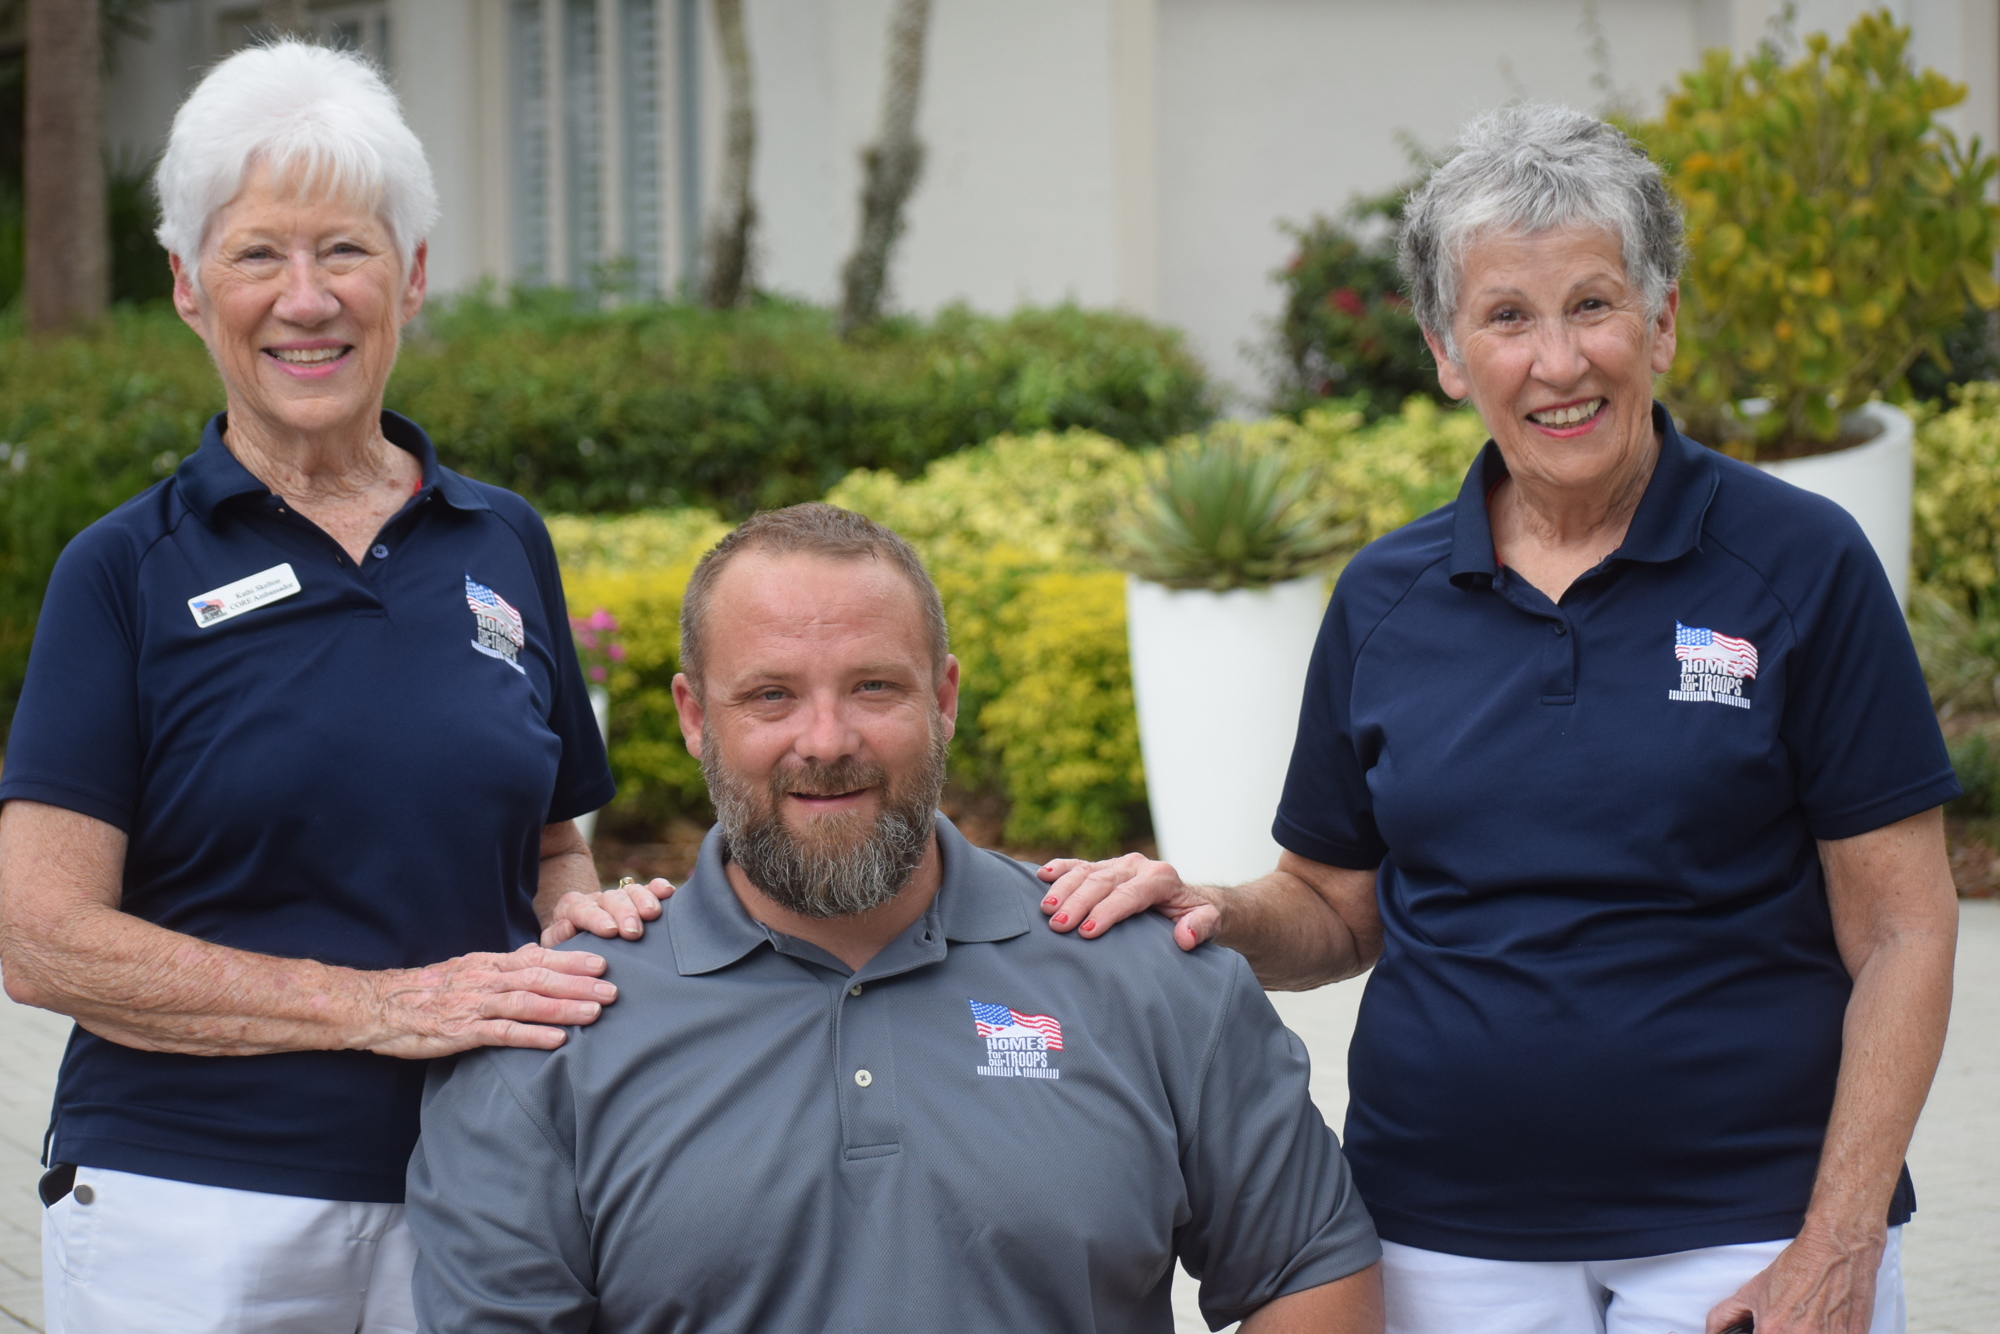 Kathi Skelton and Deb Kehoe say the Rosedale Golf Classic and its affiliated events will donate more than $175,000 to Homes for Our Troops. Army Sergeant Chad Rozanski (center) was the main recipient of this year's event.